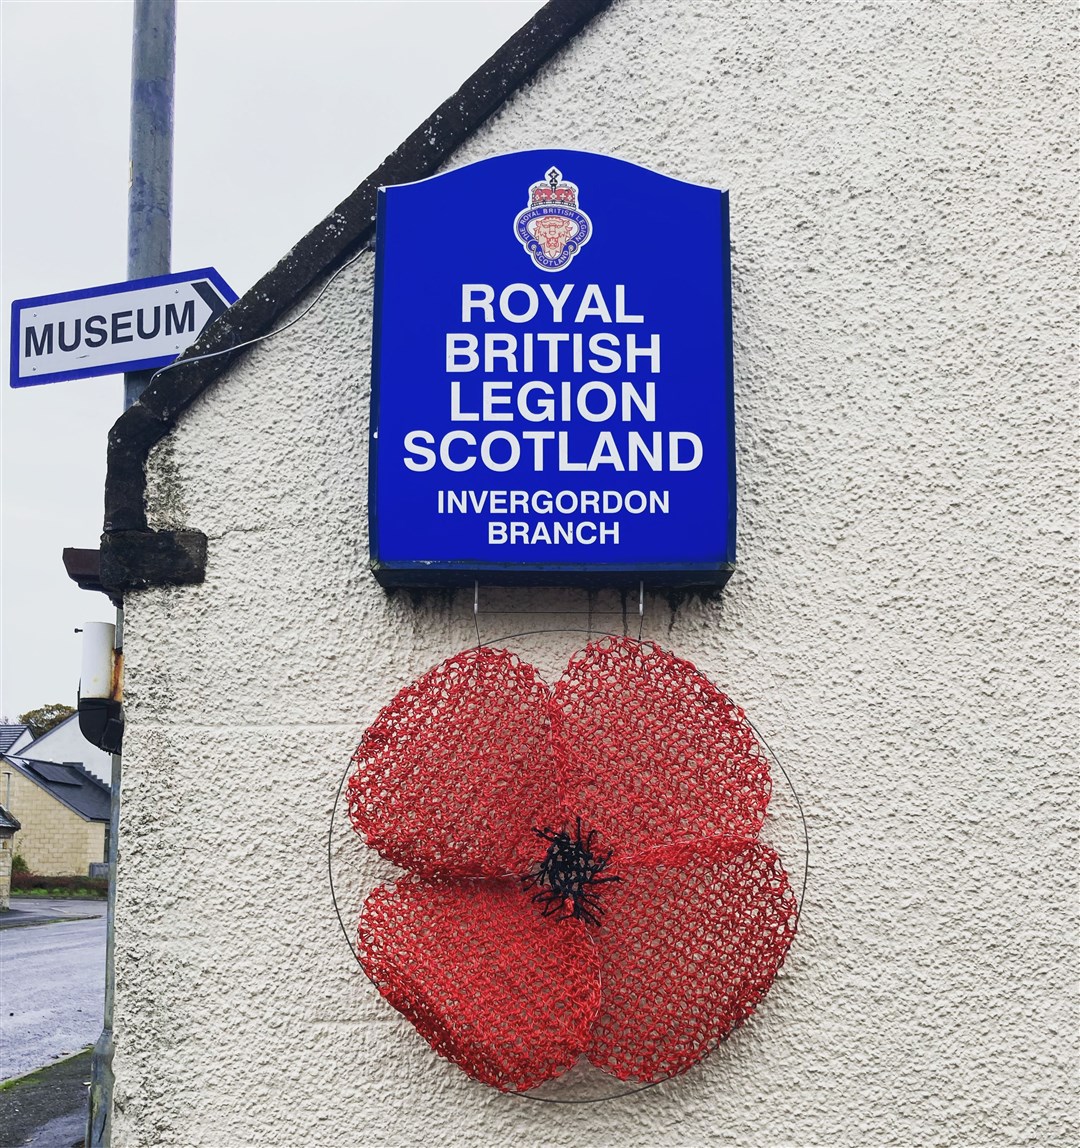 Hopes are the Royal British Legion building in Invergordon can again become a key local hub.